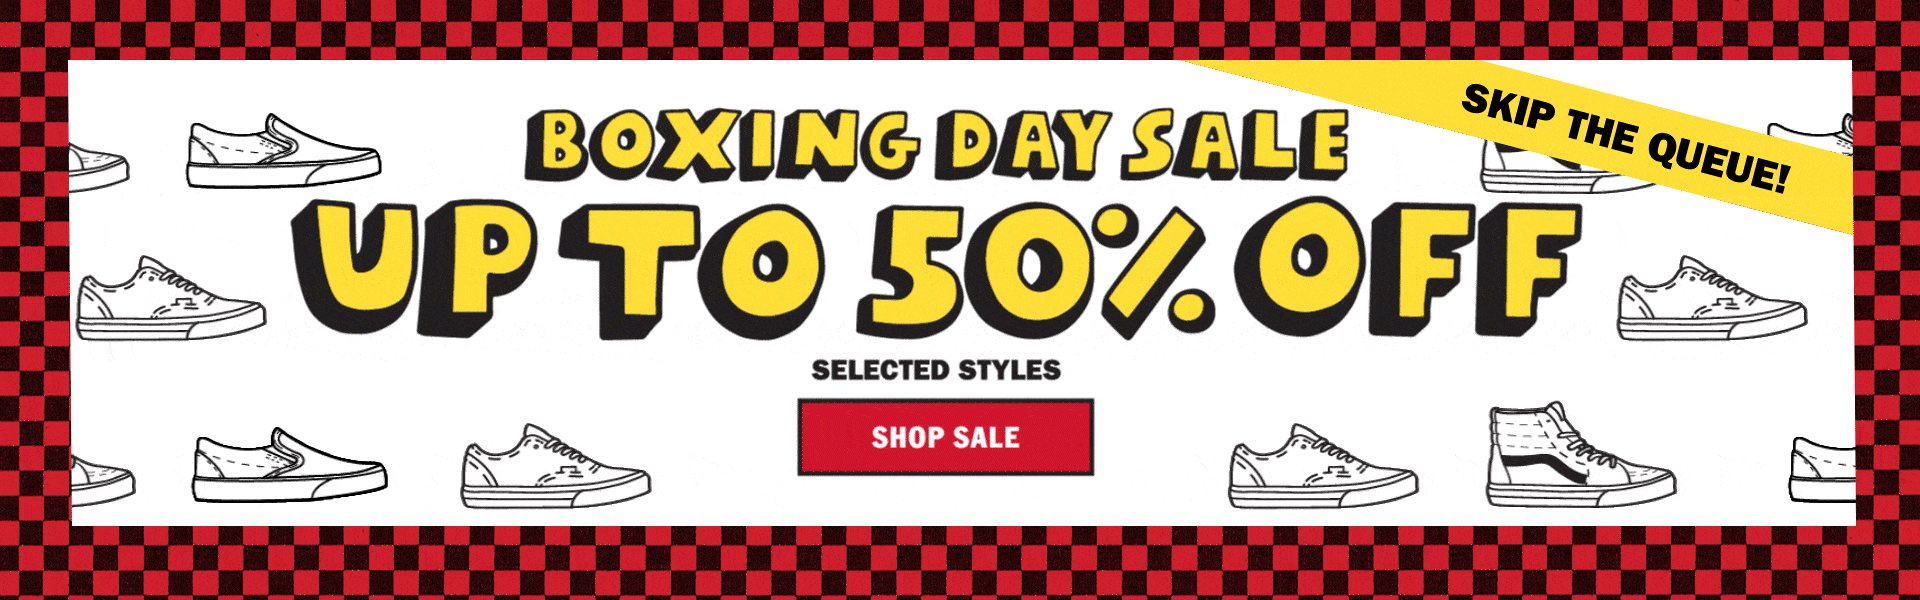 Vans Boxing Day up to 50% OFF on selected styles for men, women & kids